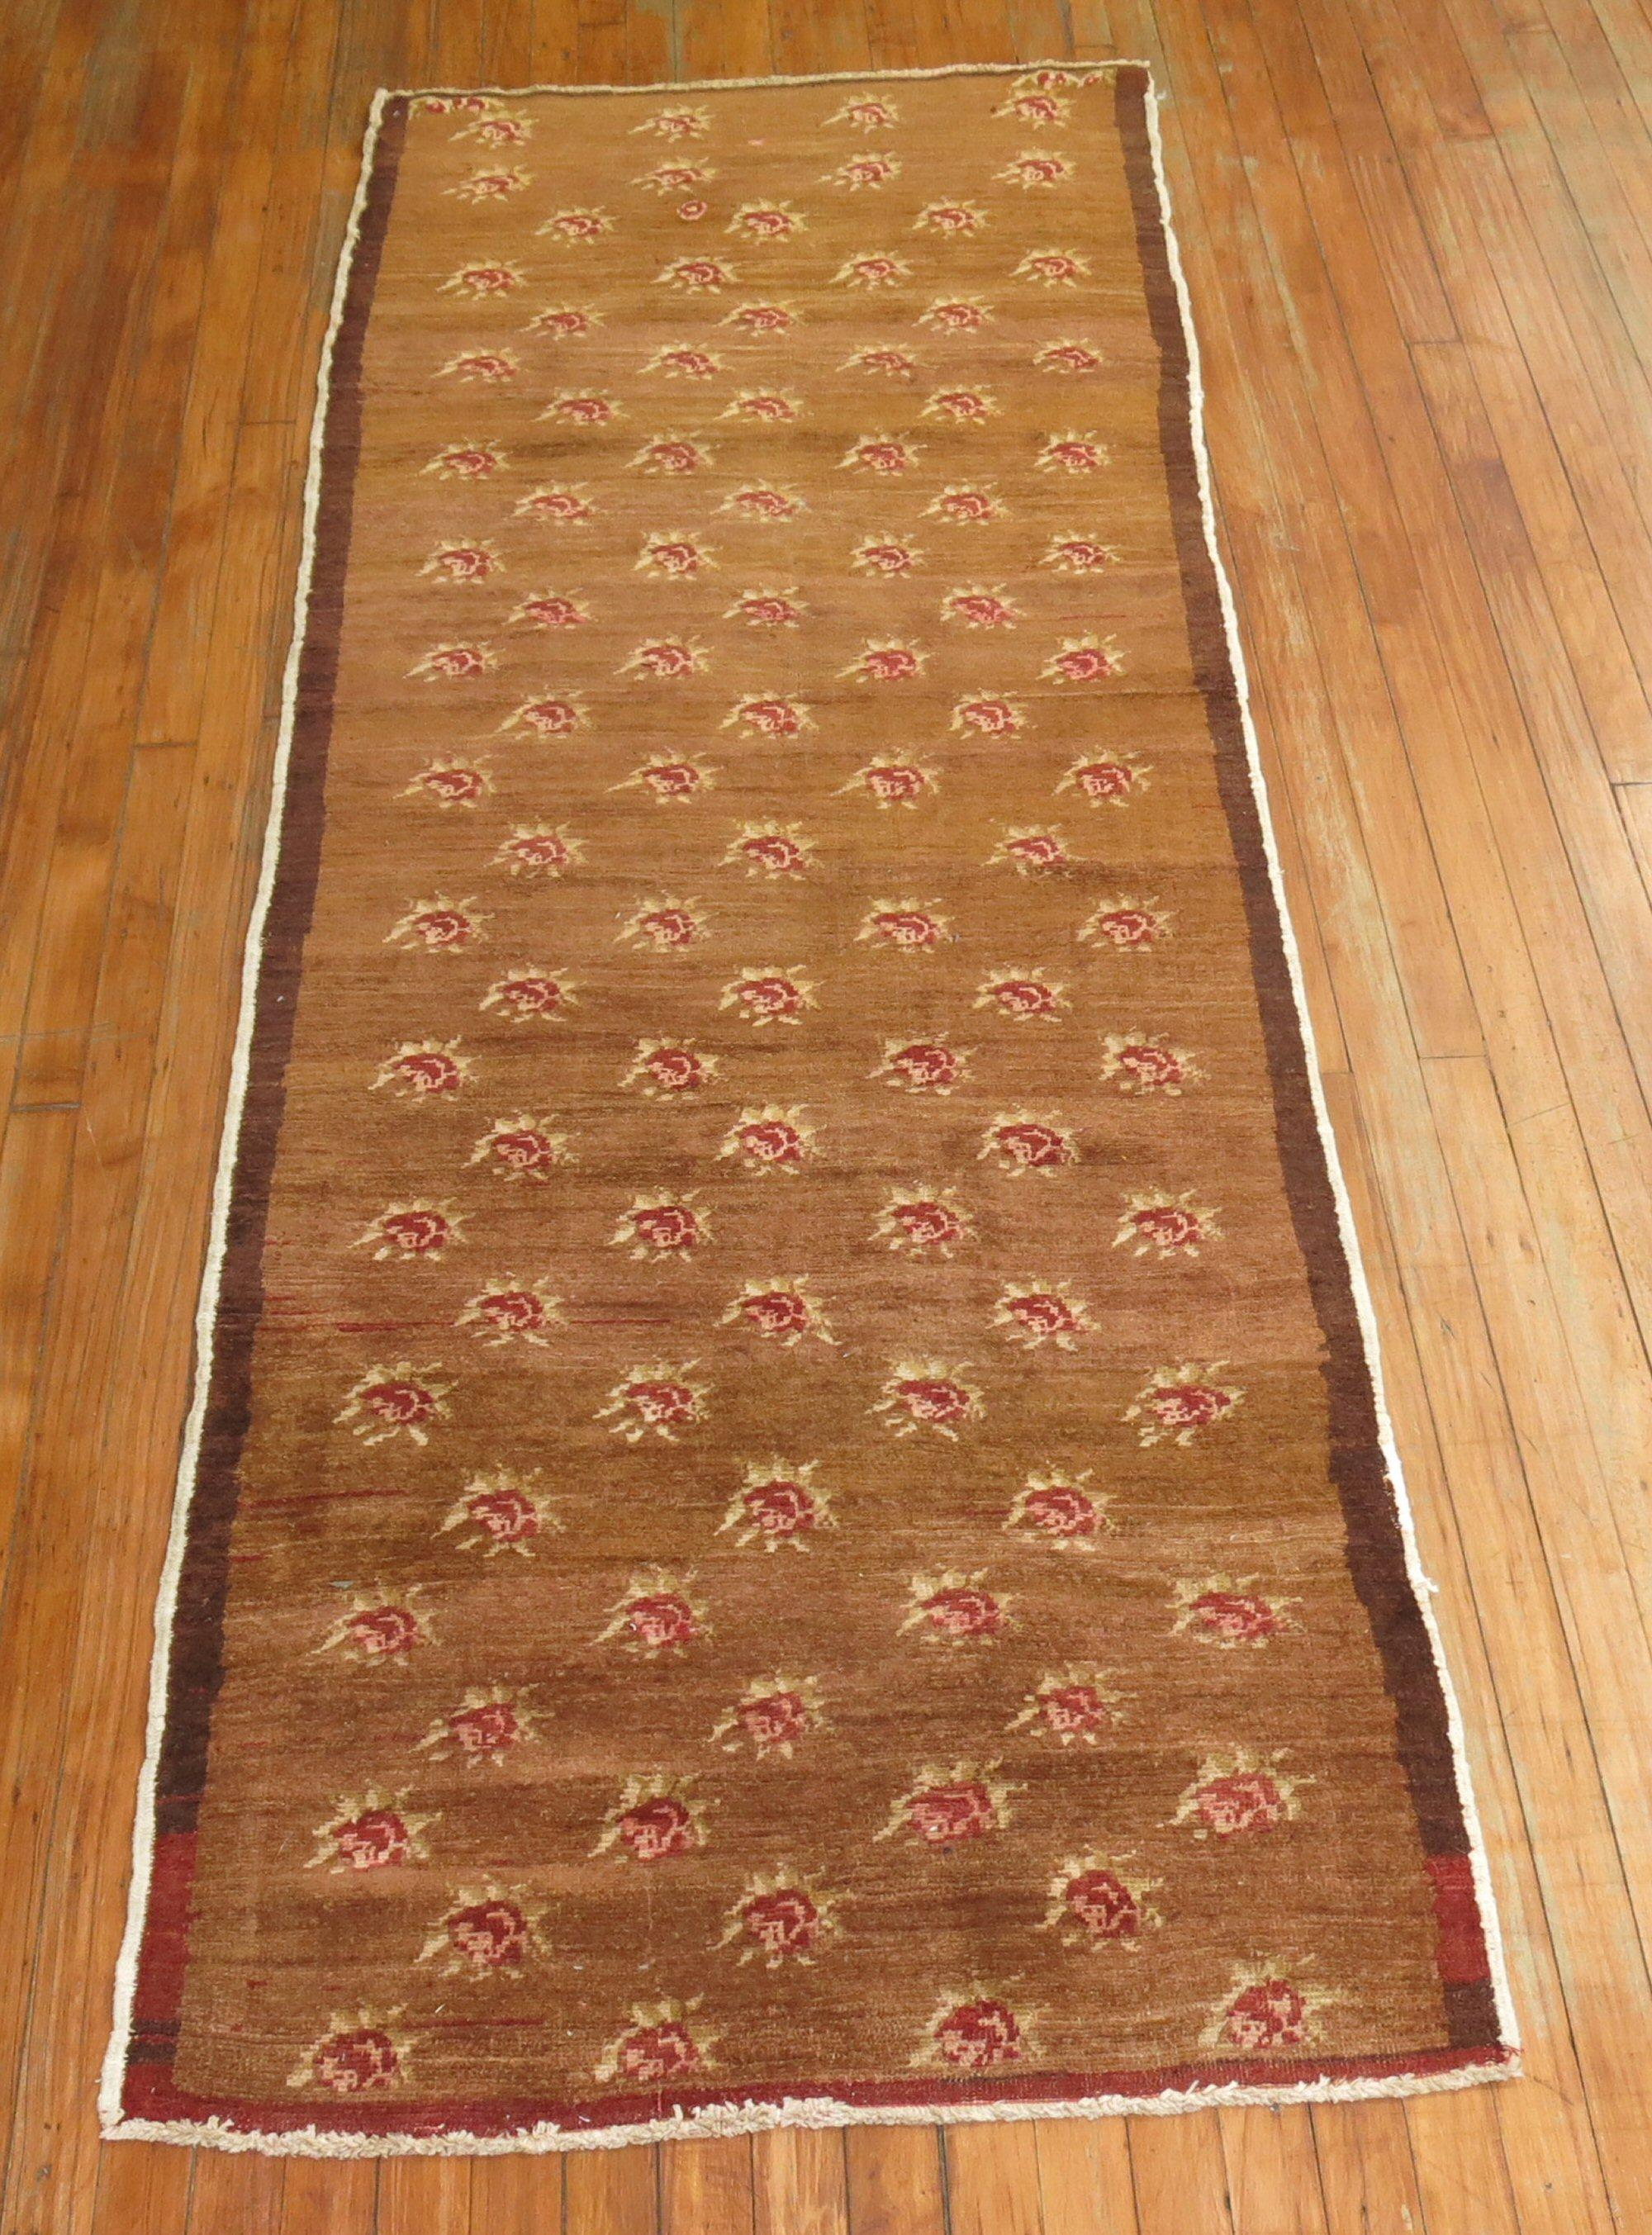 Mid-20th century Turkish runner with an all over repetitive flower design.

2'11'' x 7'8''